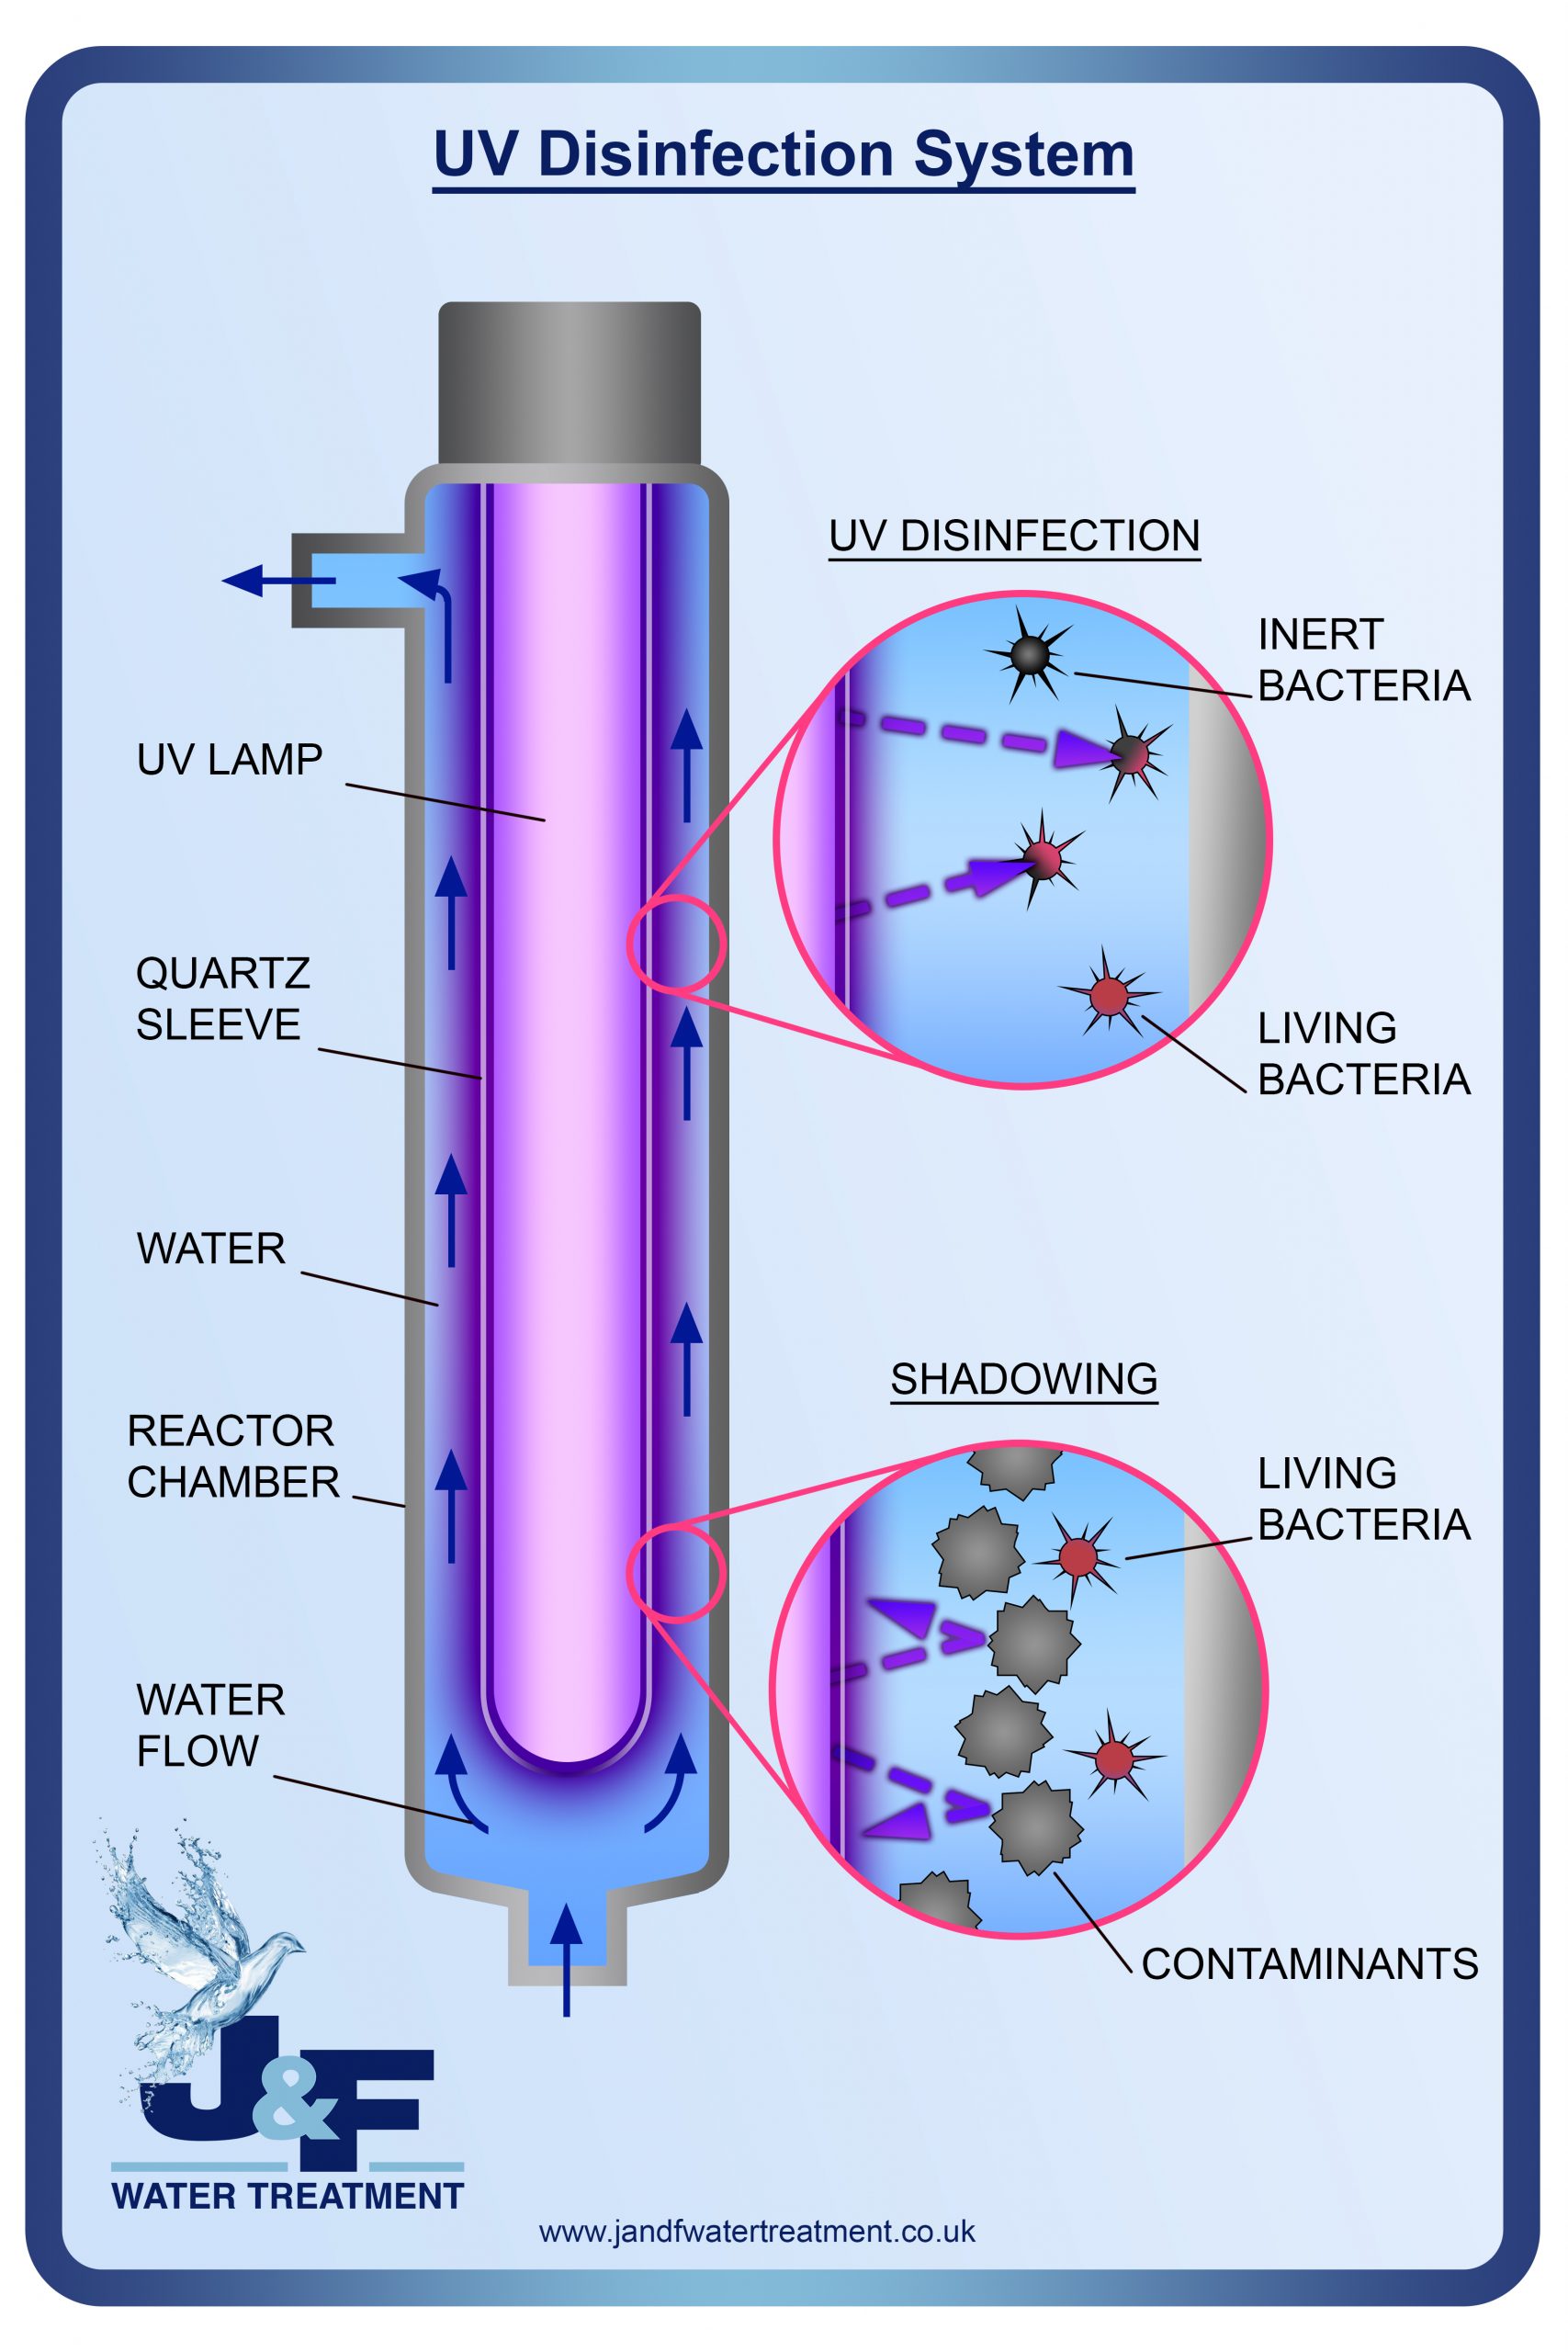 How Does UV Disinfection Work?